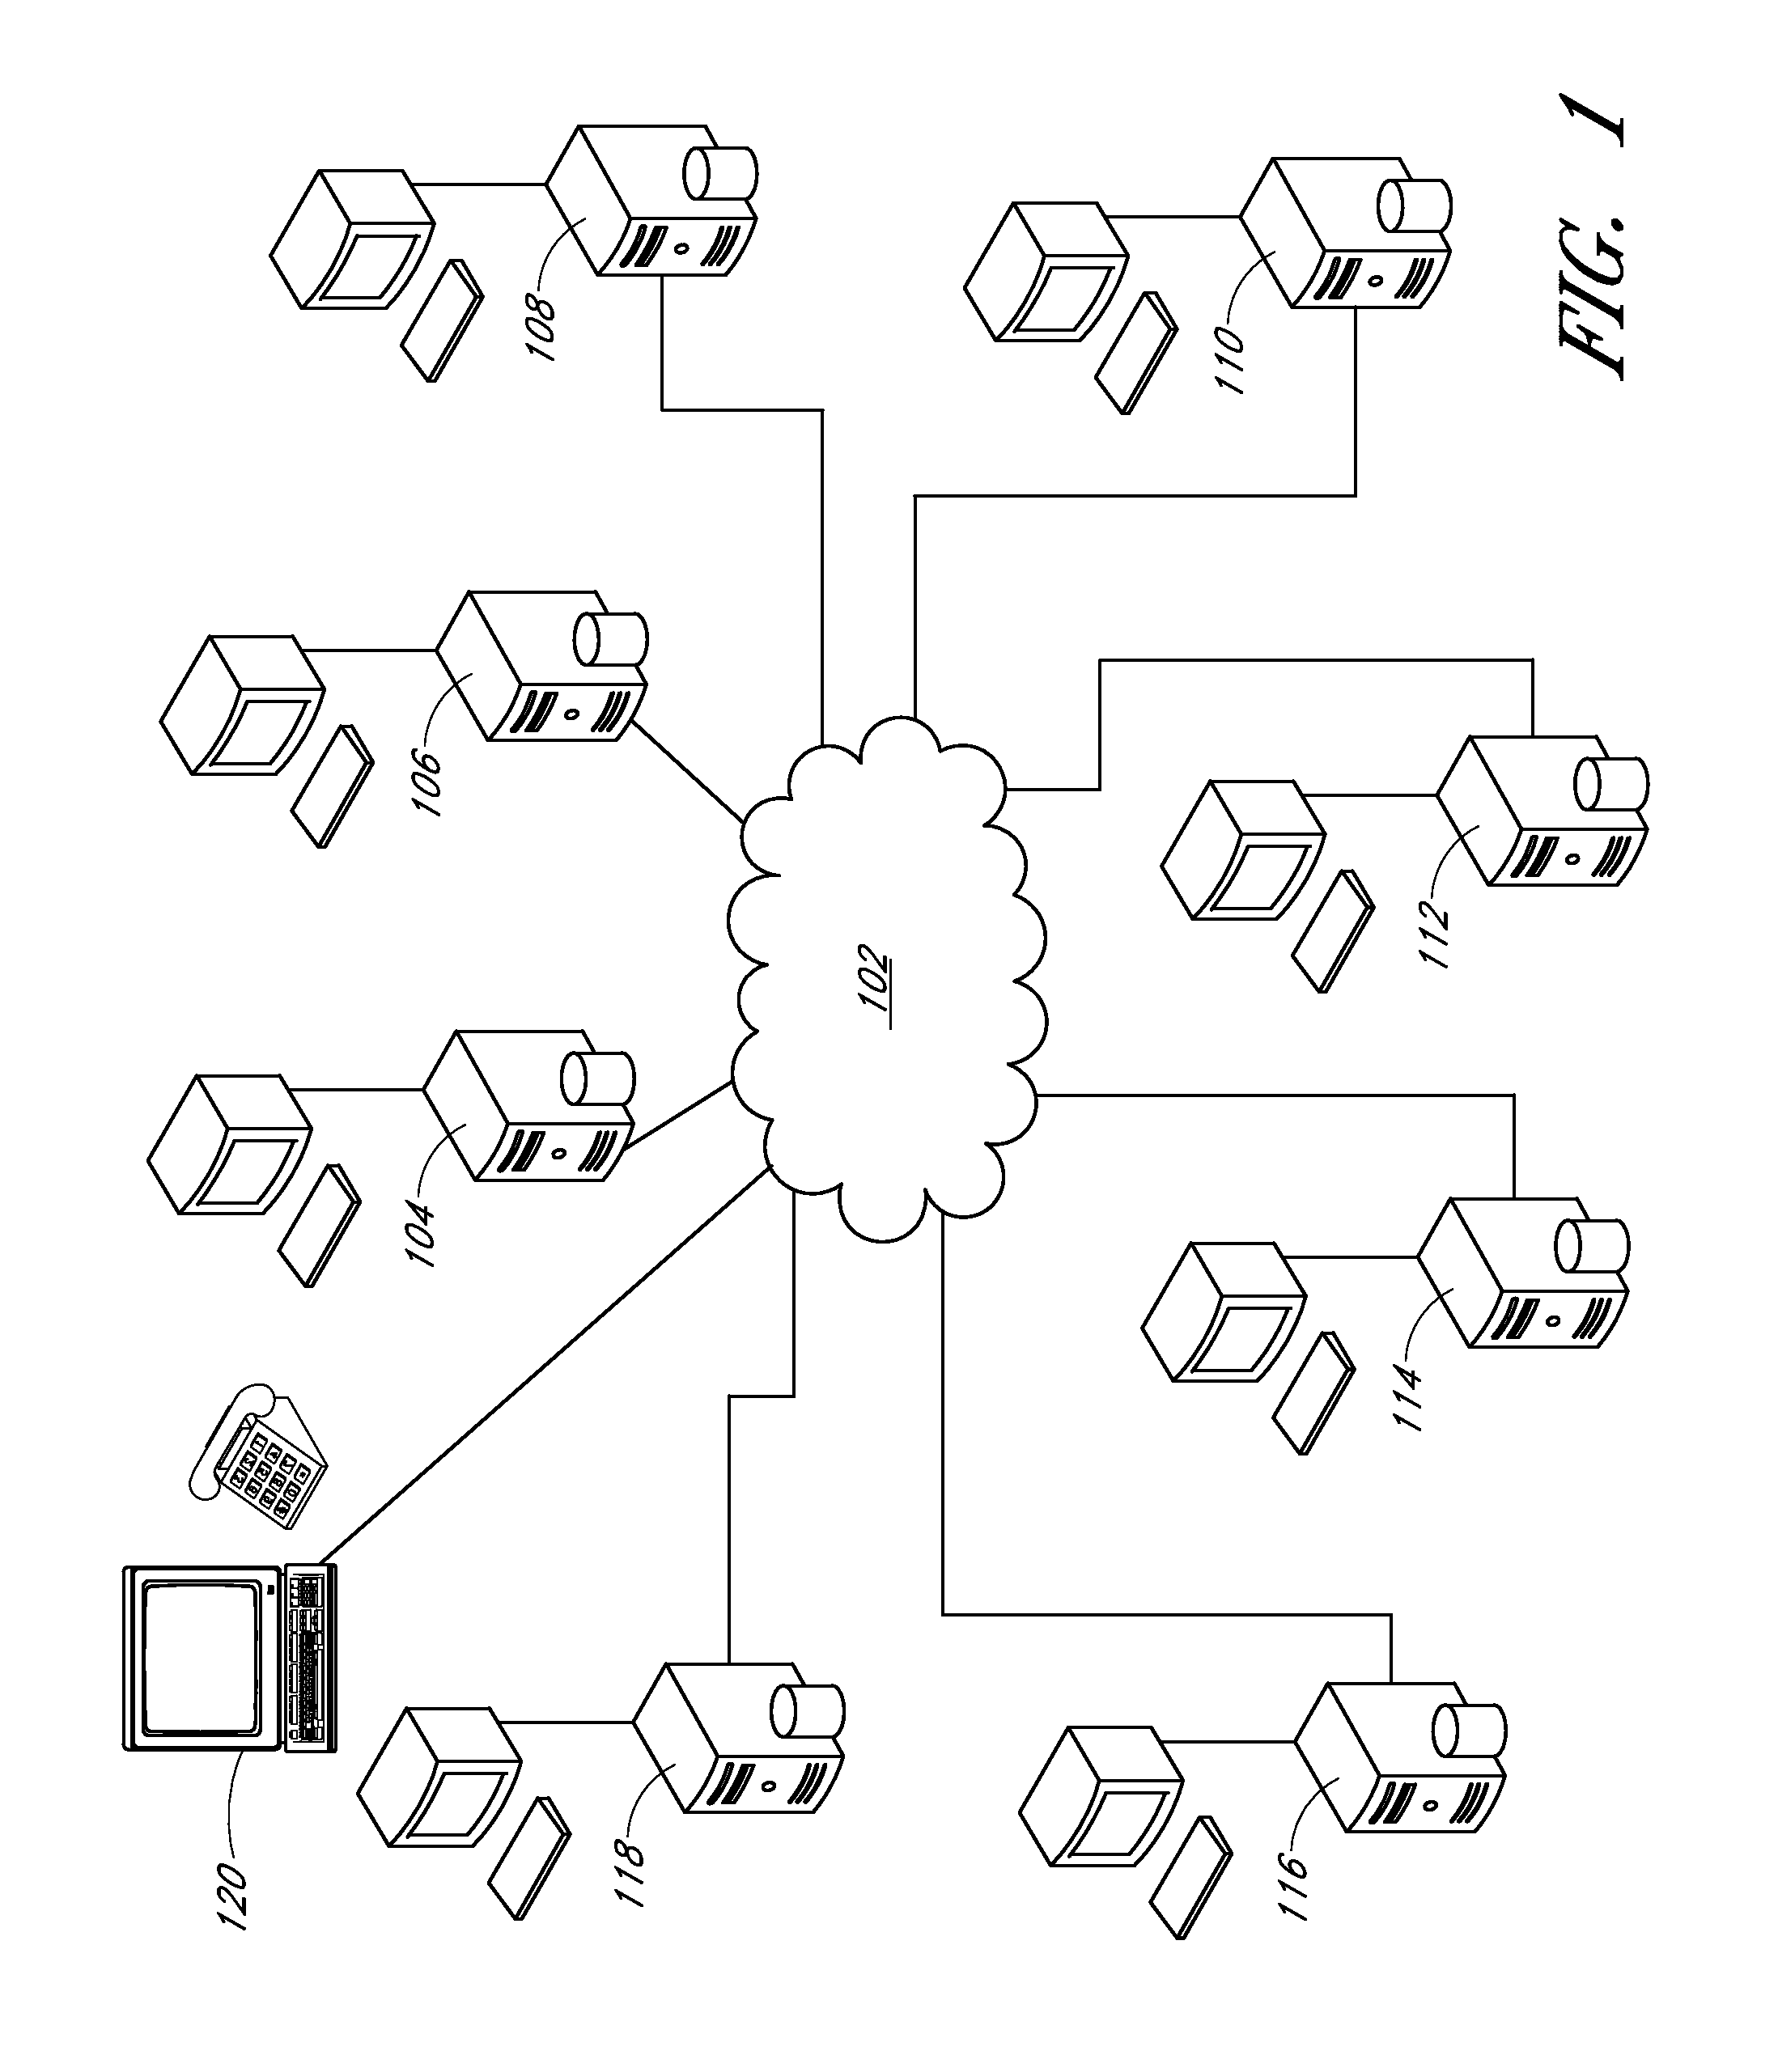 Systems and methods for managing data communications across disparate systems and devices